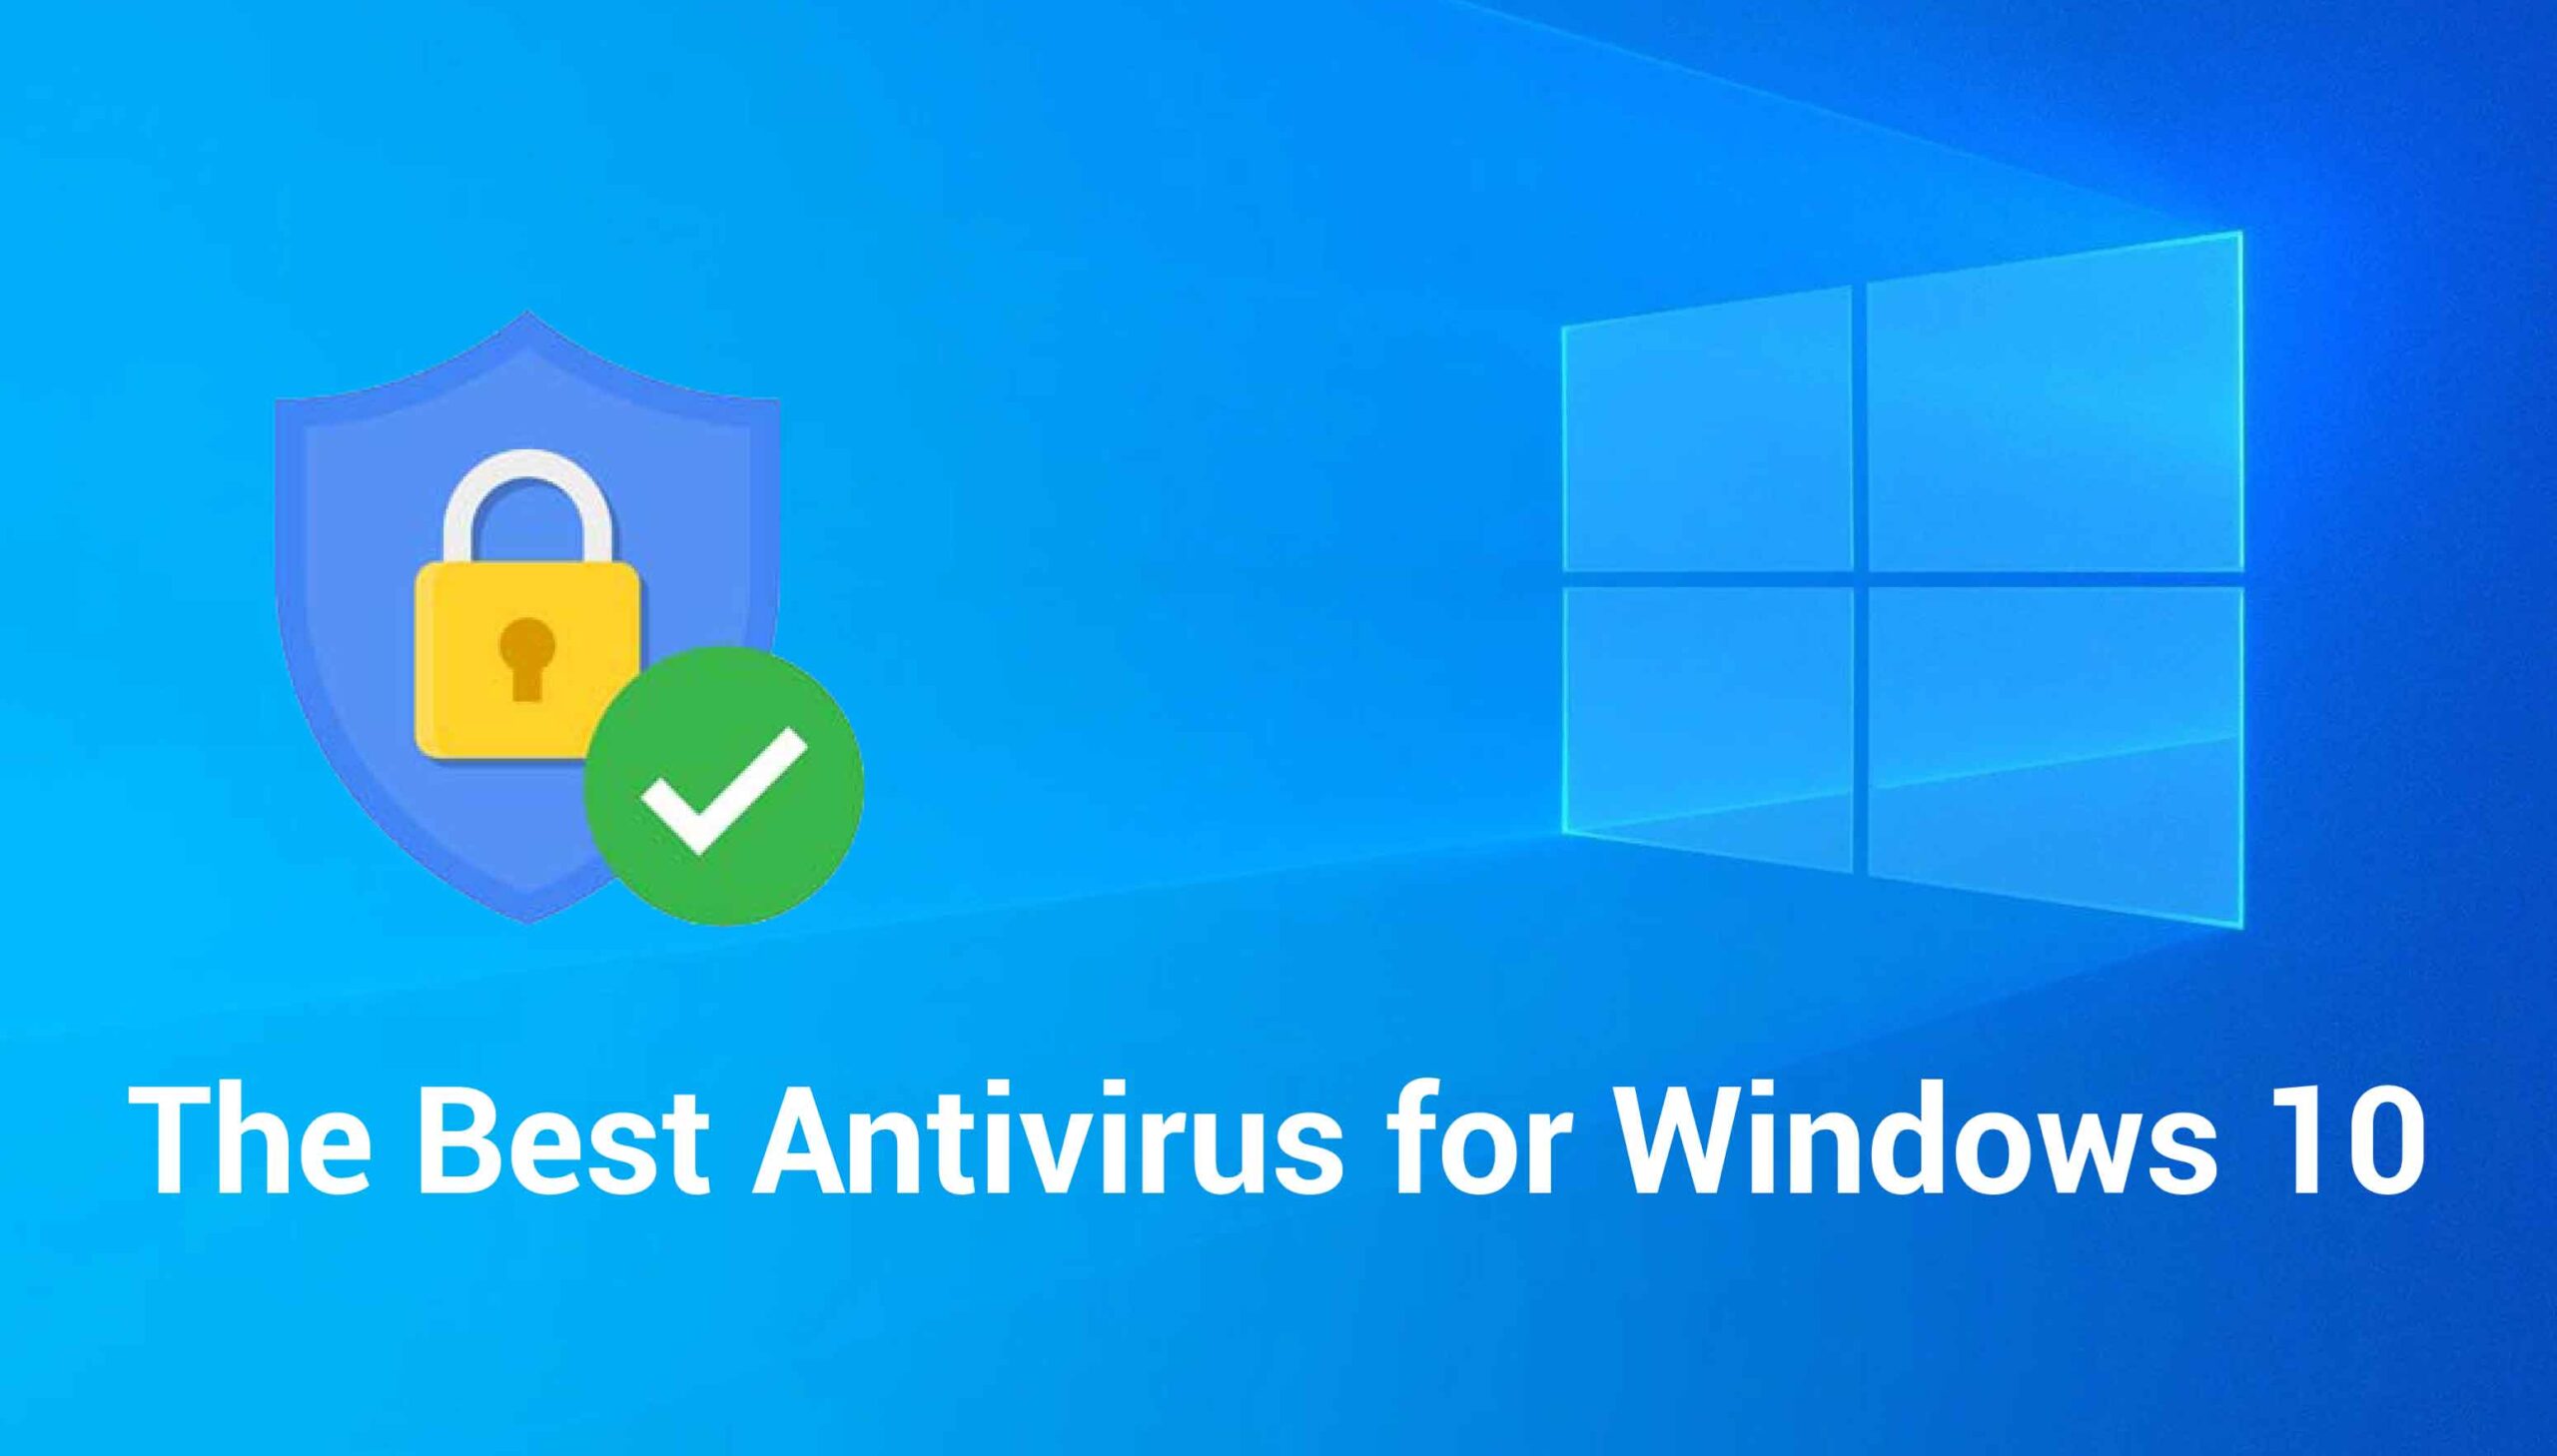 The best antivirus for Windows 10 (and 11) 1